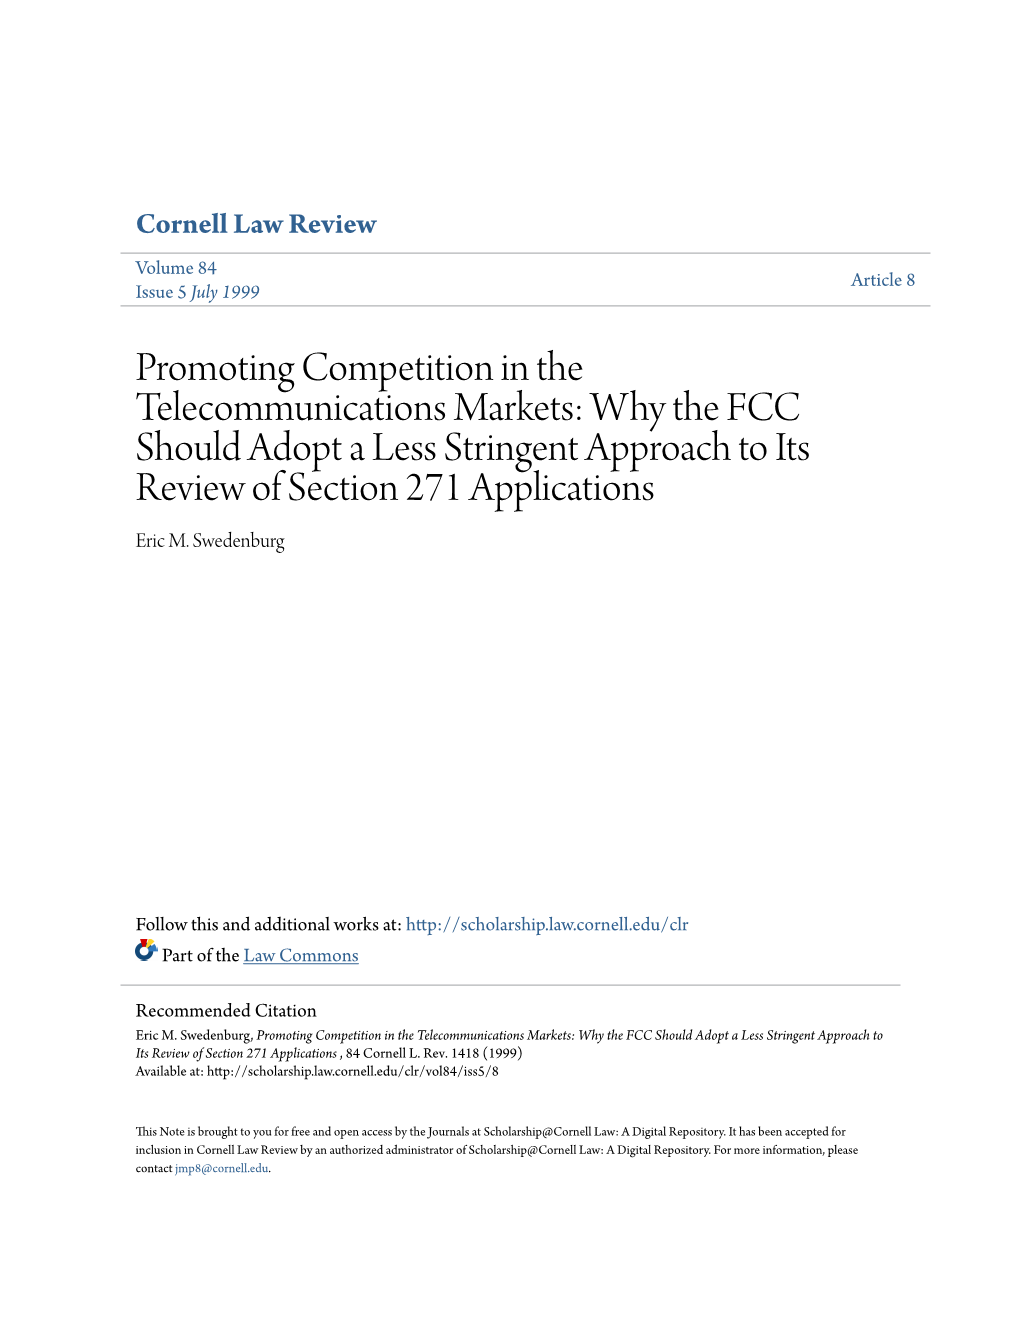 Promoting Competition in the Telecommunications Markets: Why the FCC Should Adopt a Less Stringent Approach to Its Review of Section 271 Applications Eric M